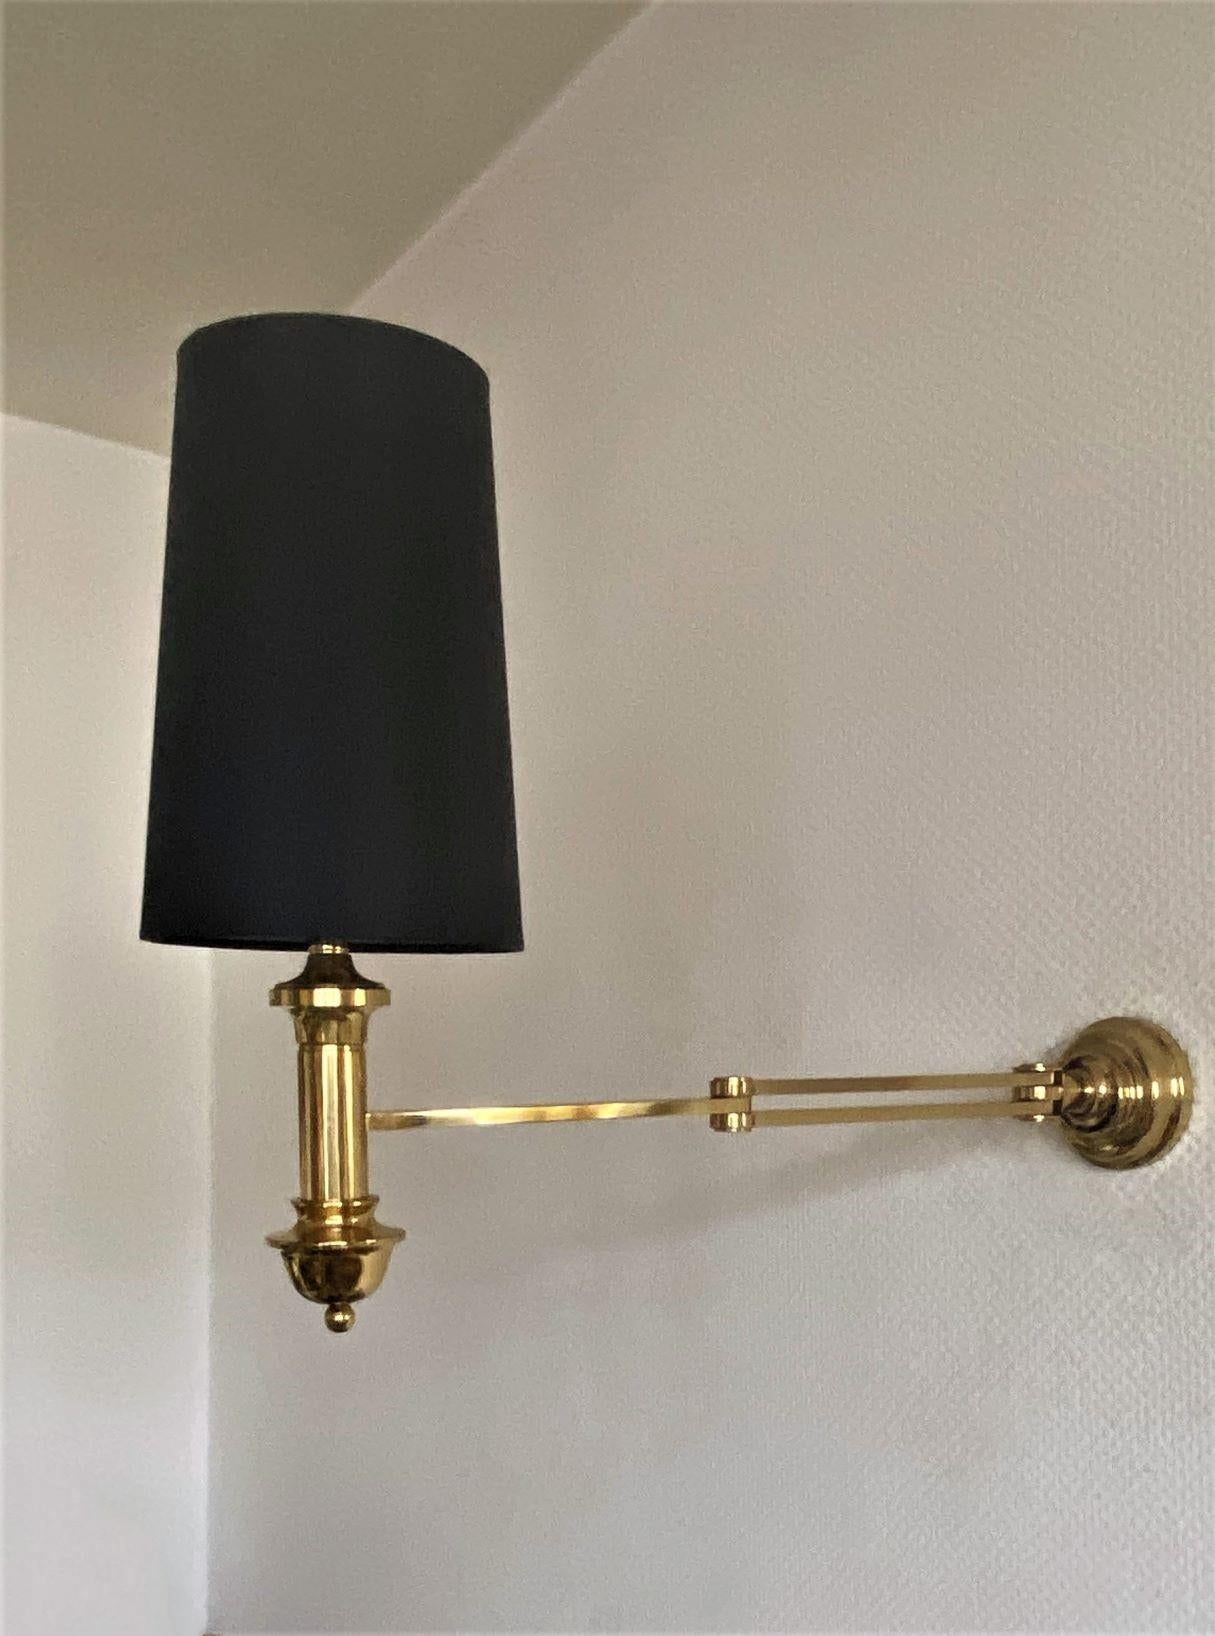 Pair of Maison Jansen Style Brass Swing Arm Wall Sconces Lights, 1960s For Sale 7